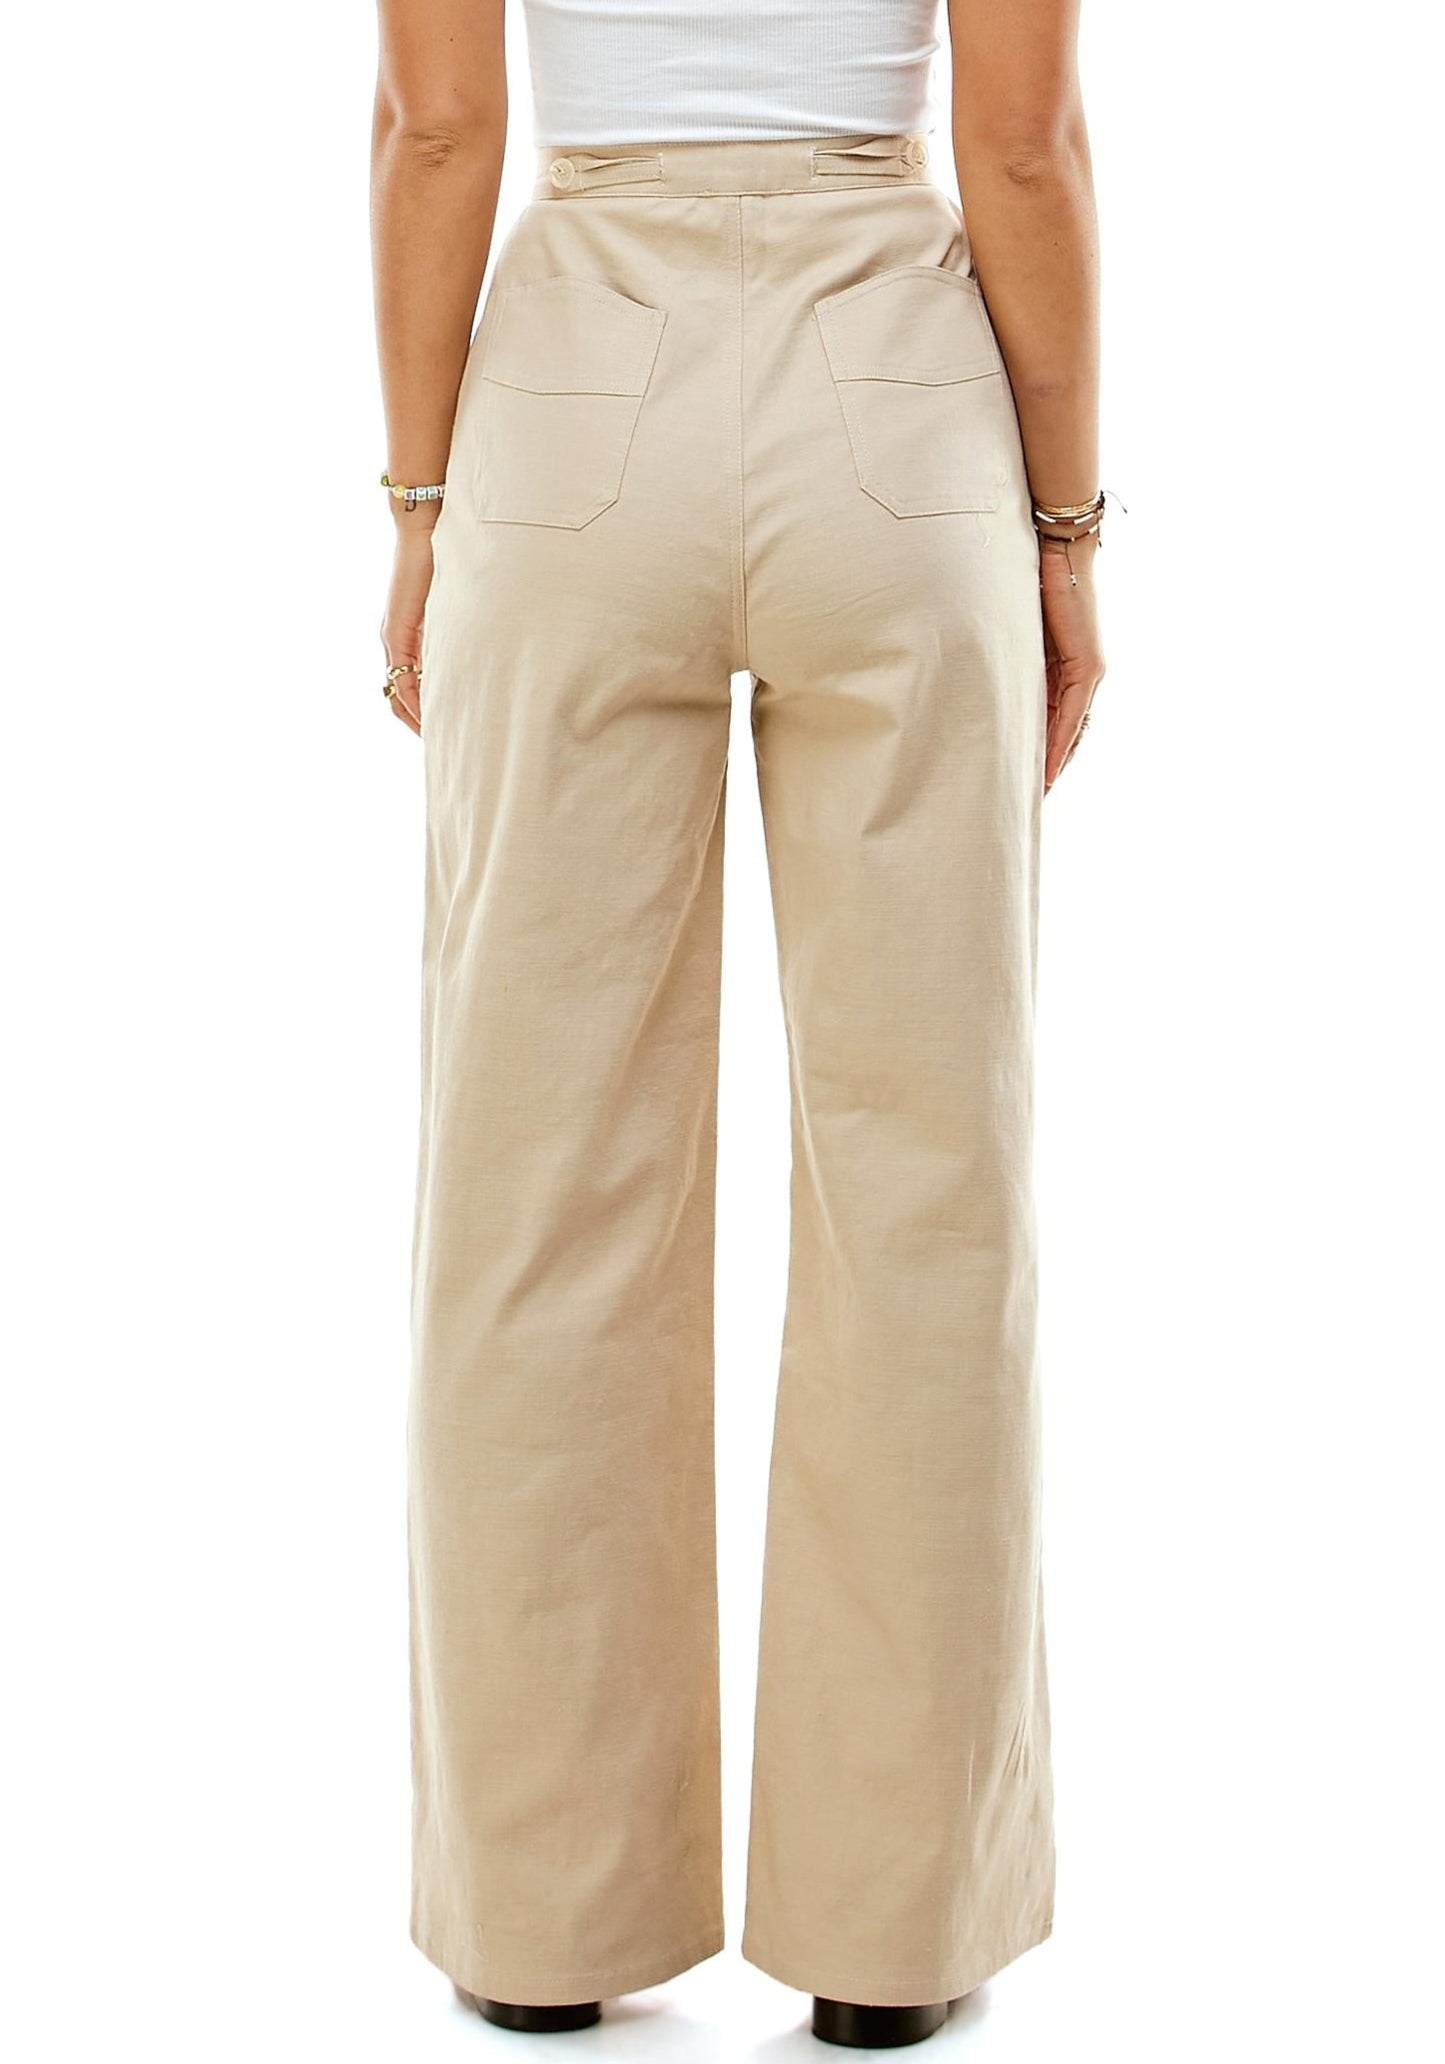 Spencer Twill Pant in Milk